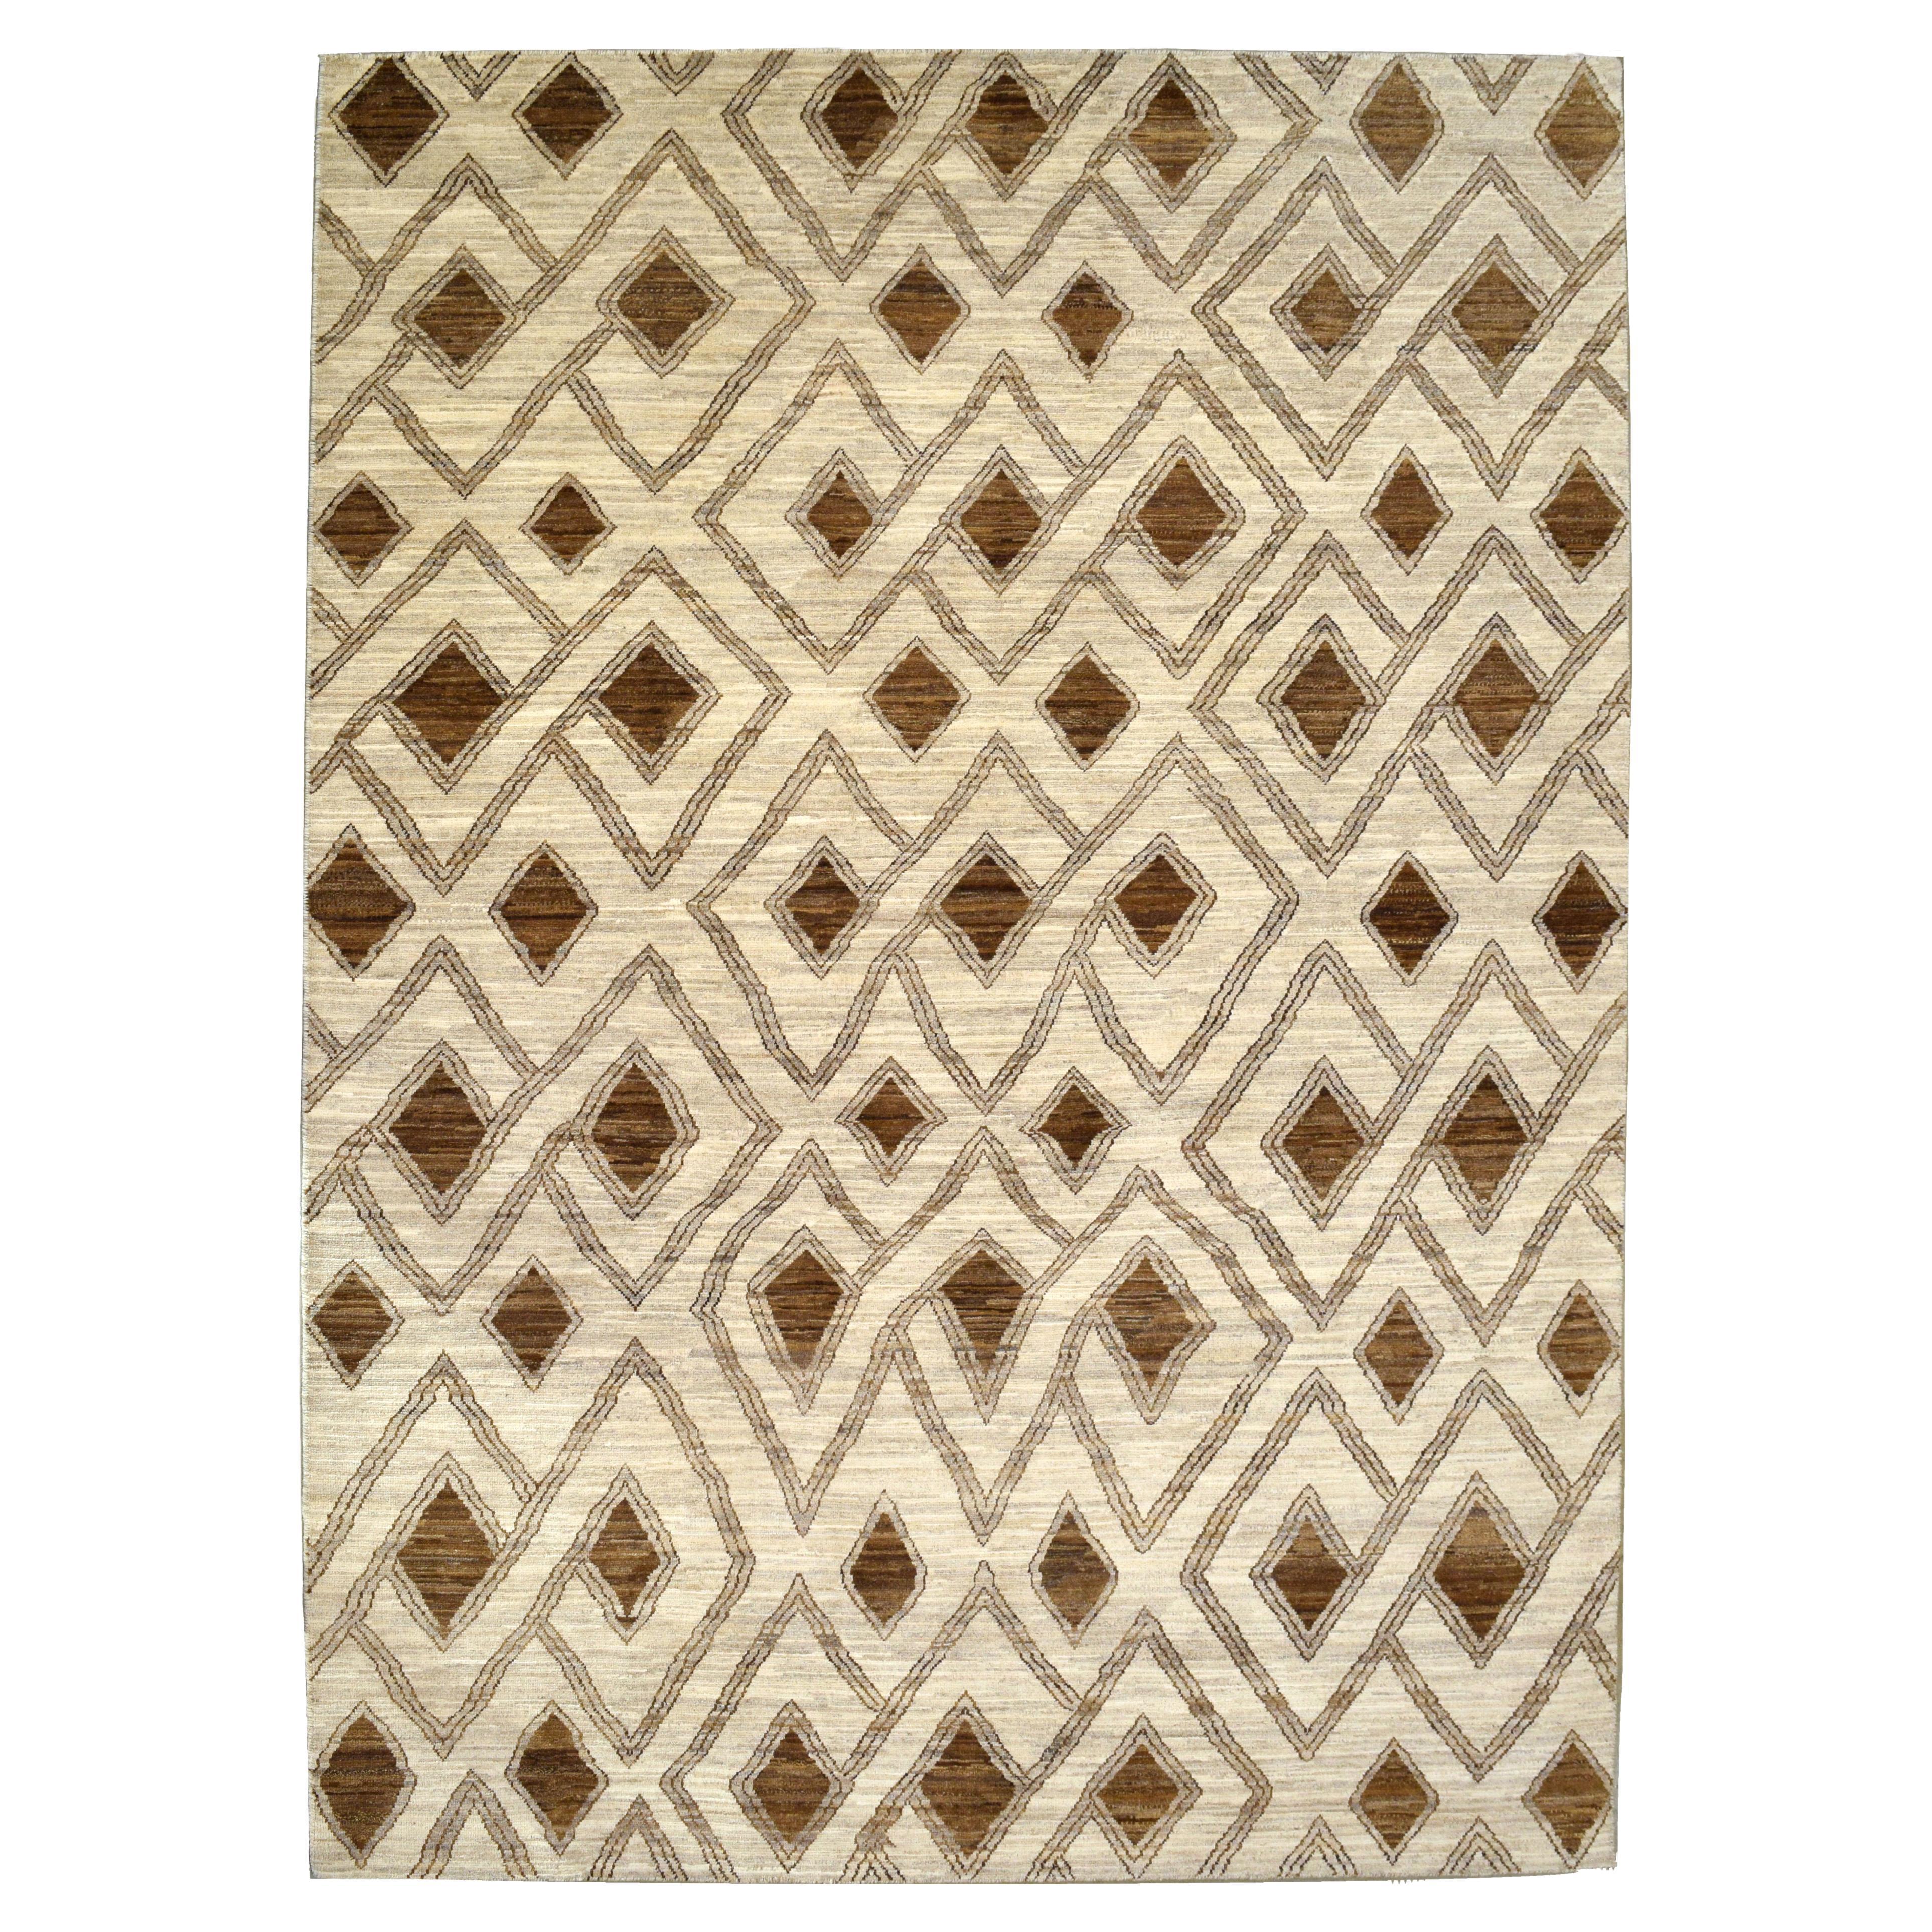 Geometric Neutral Wool Carpet in Brown and Cream For Sale